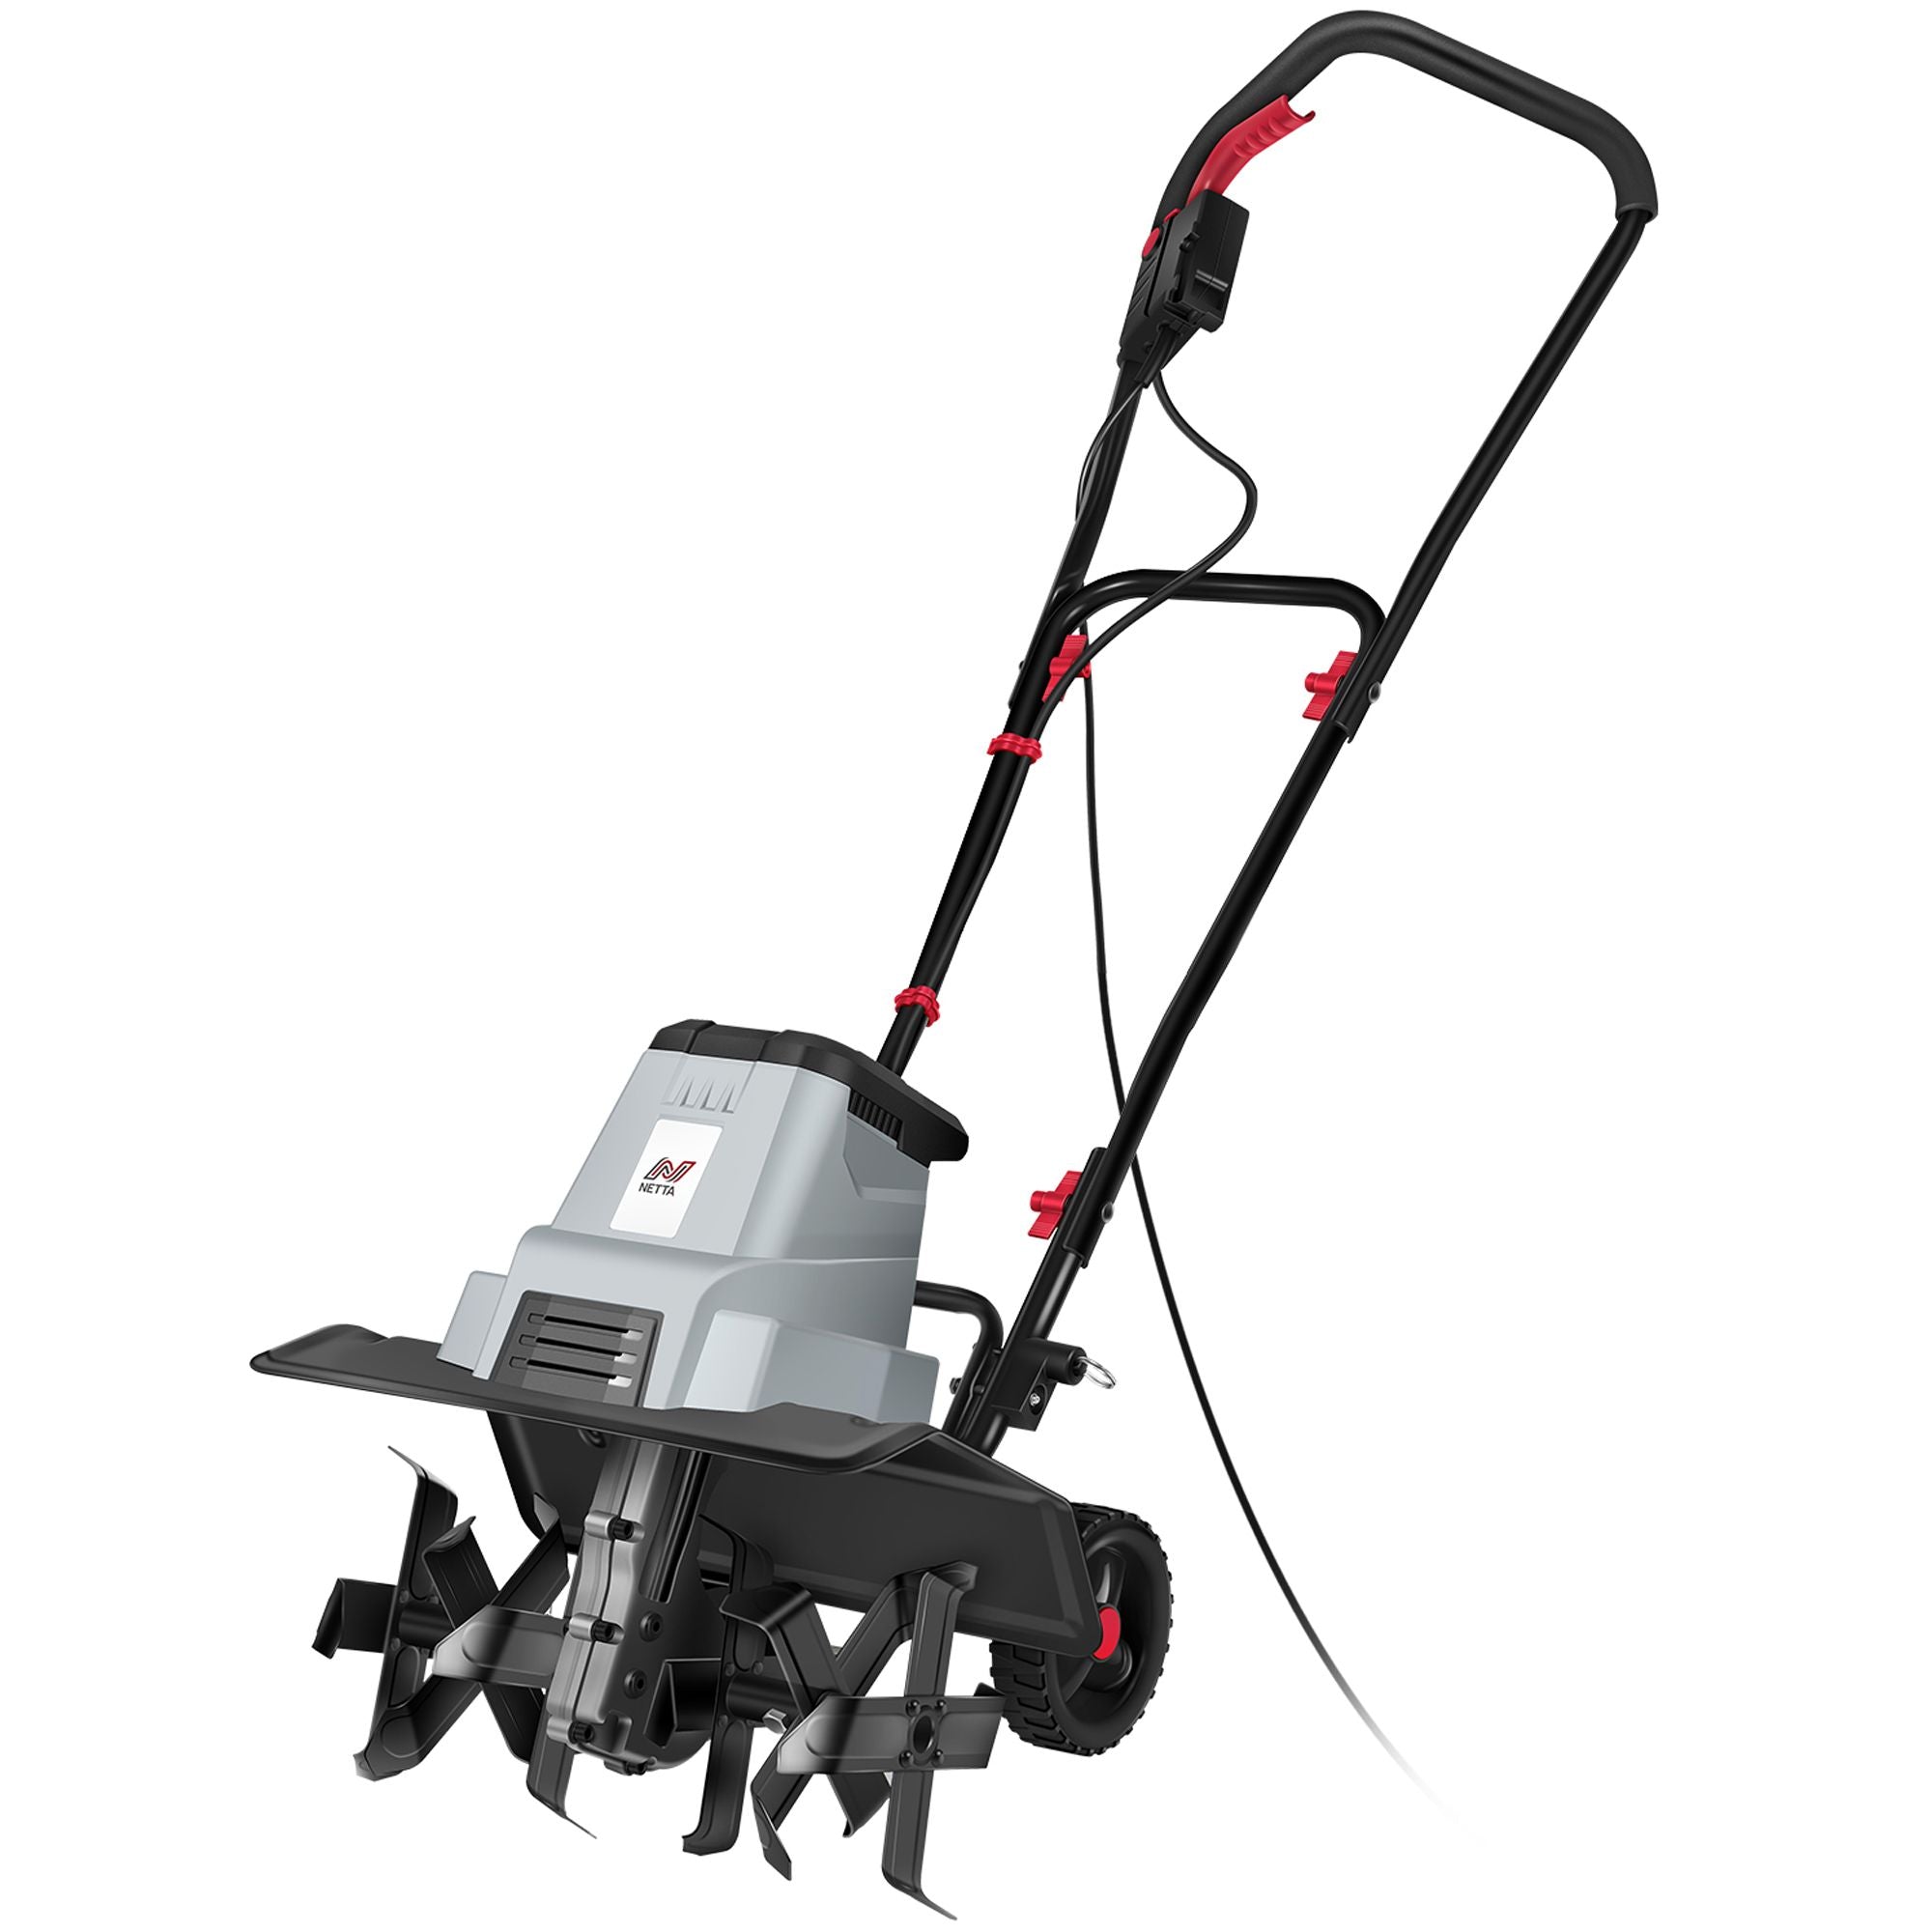 NETTA 1500W Electric Corded Tiller & Cultivator with 6 Blades